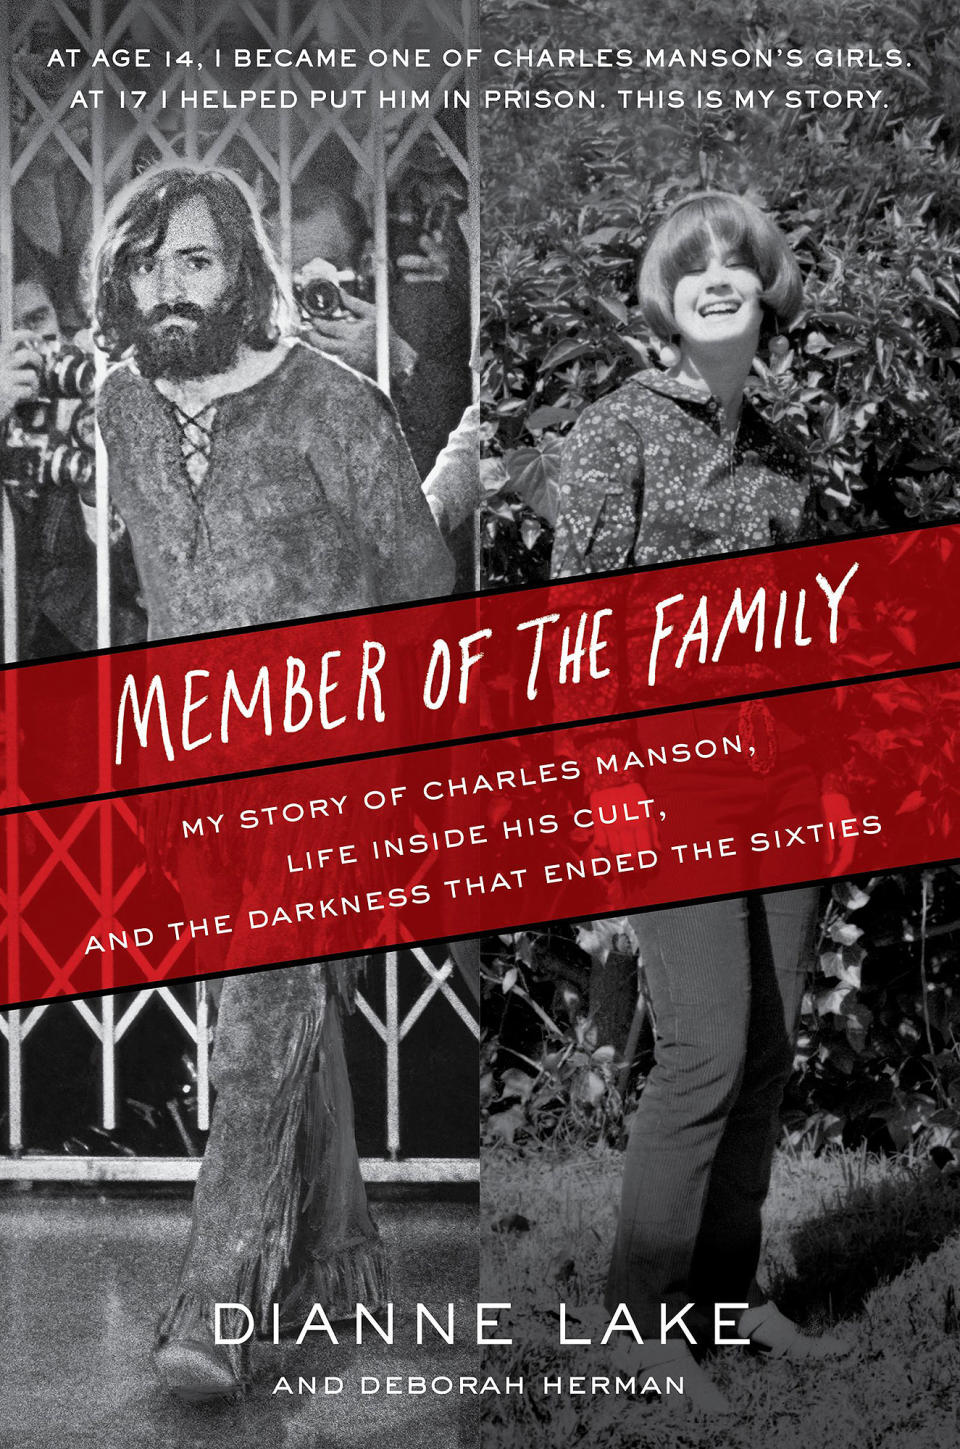 Manson Family's Youngest Member Shares How She Was Seduced by a Madman at Age 14